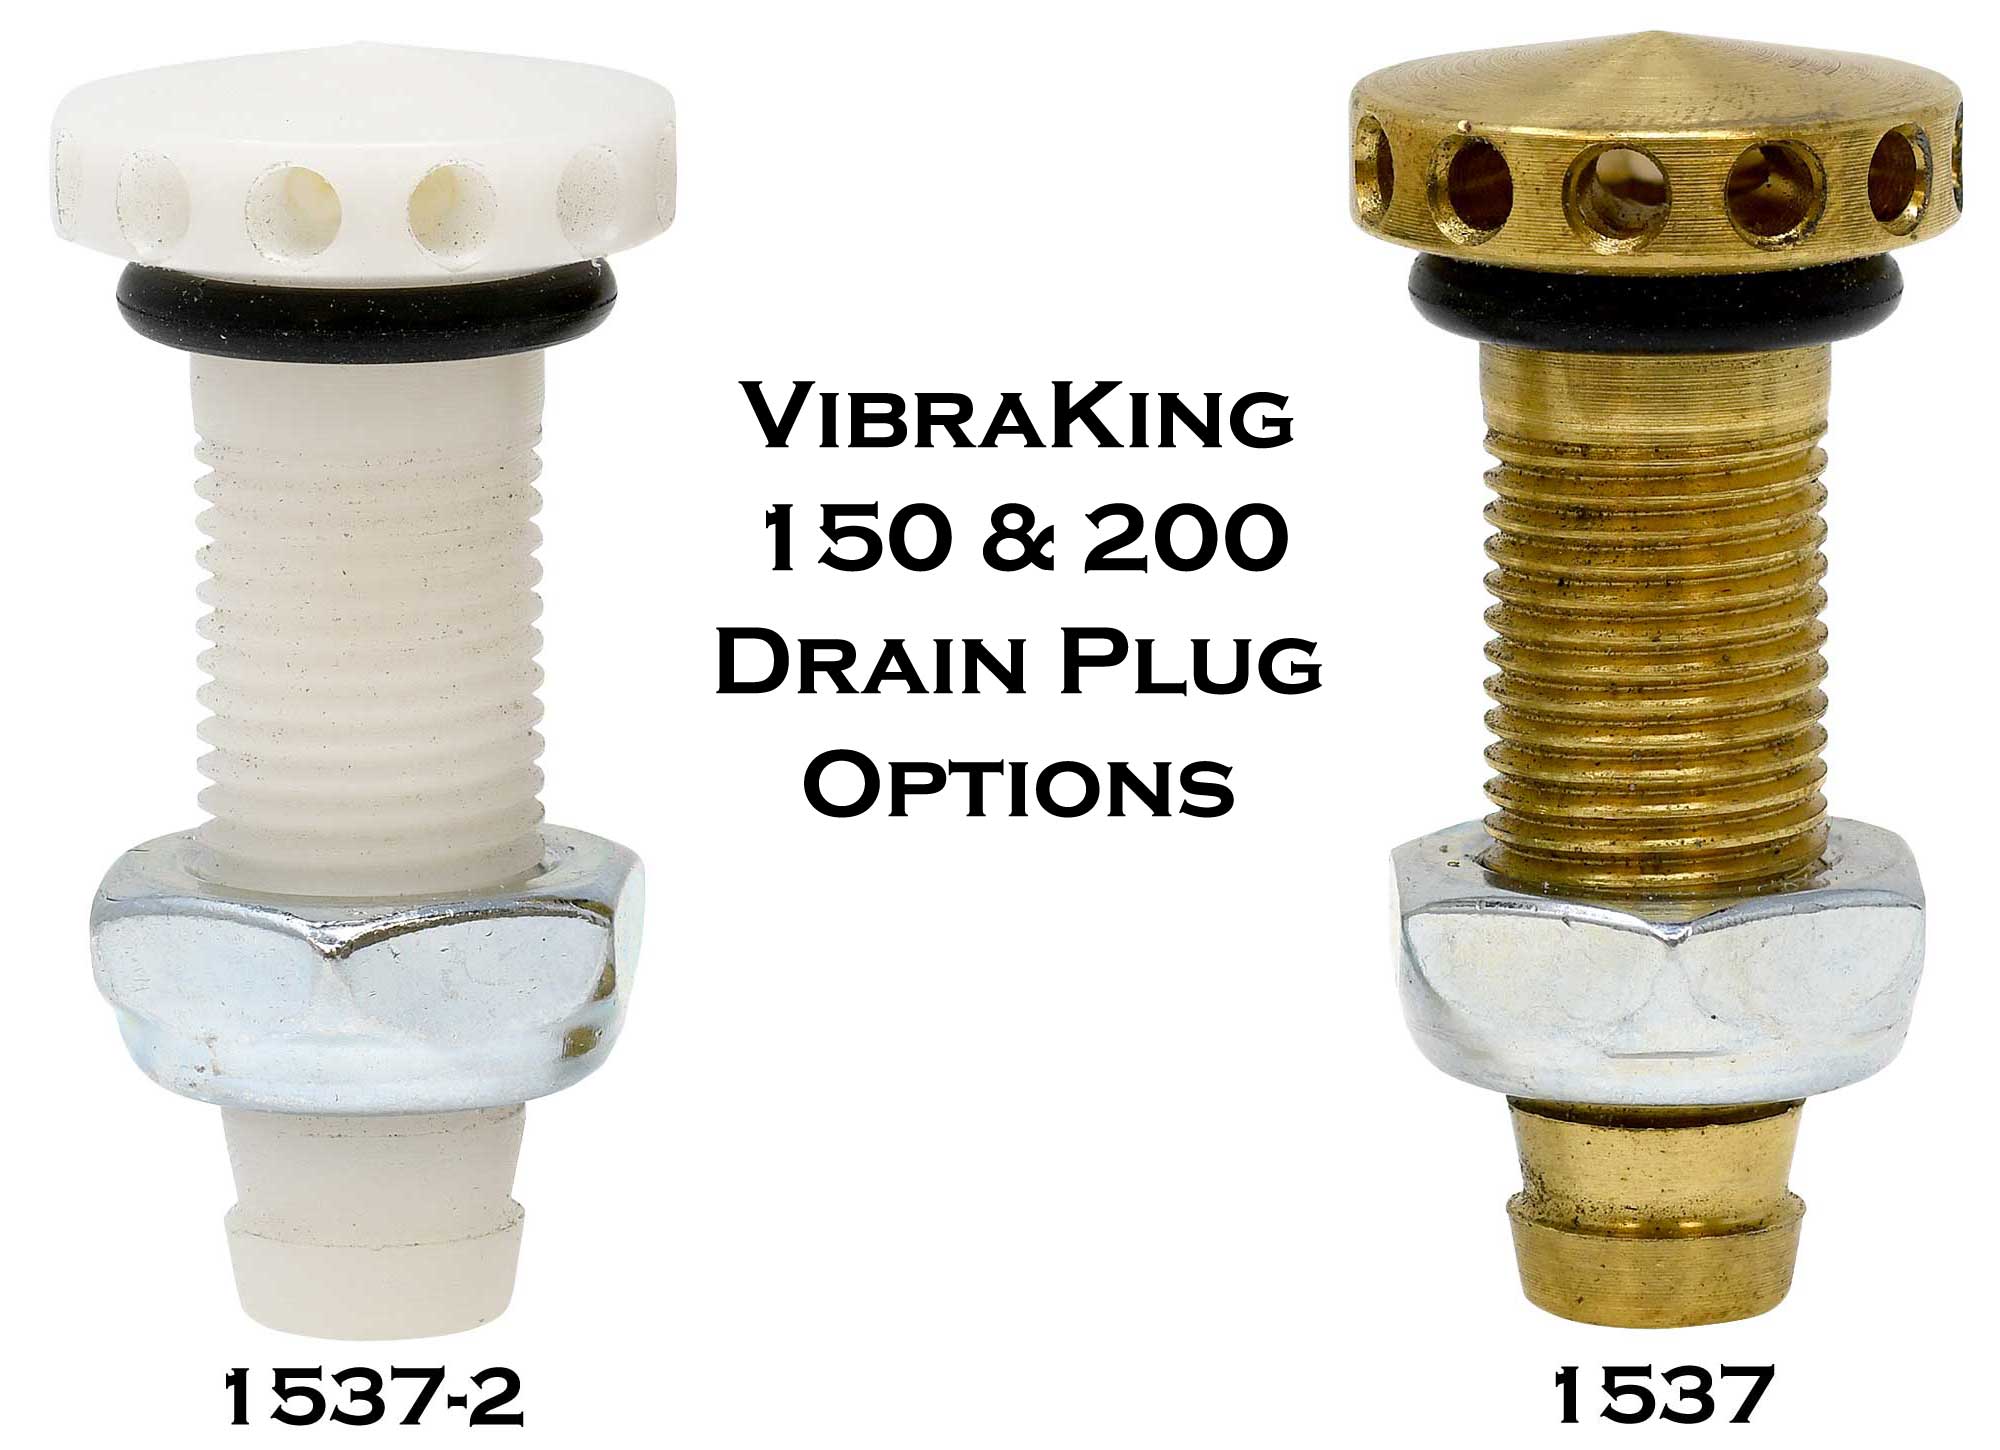 1537 and 1537-2 Drain Plug for 150/200